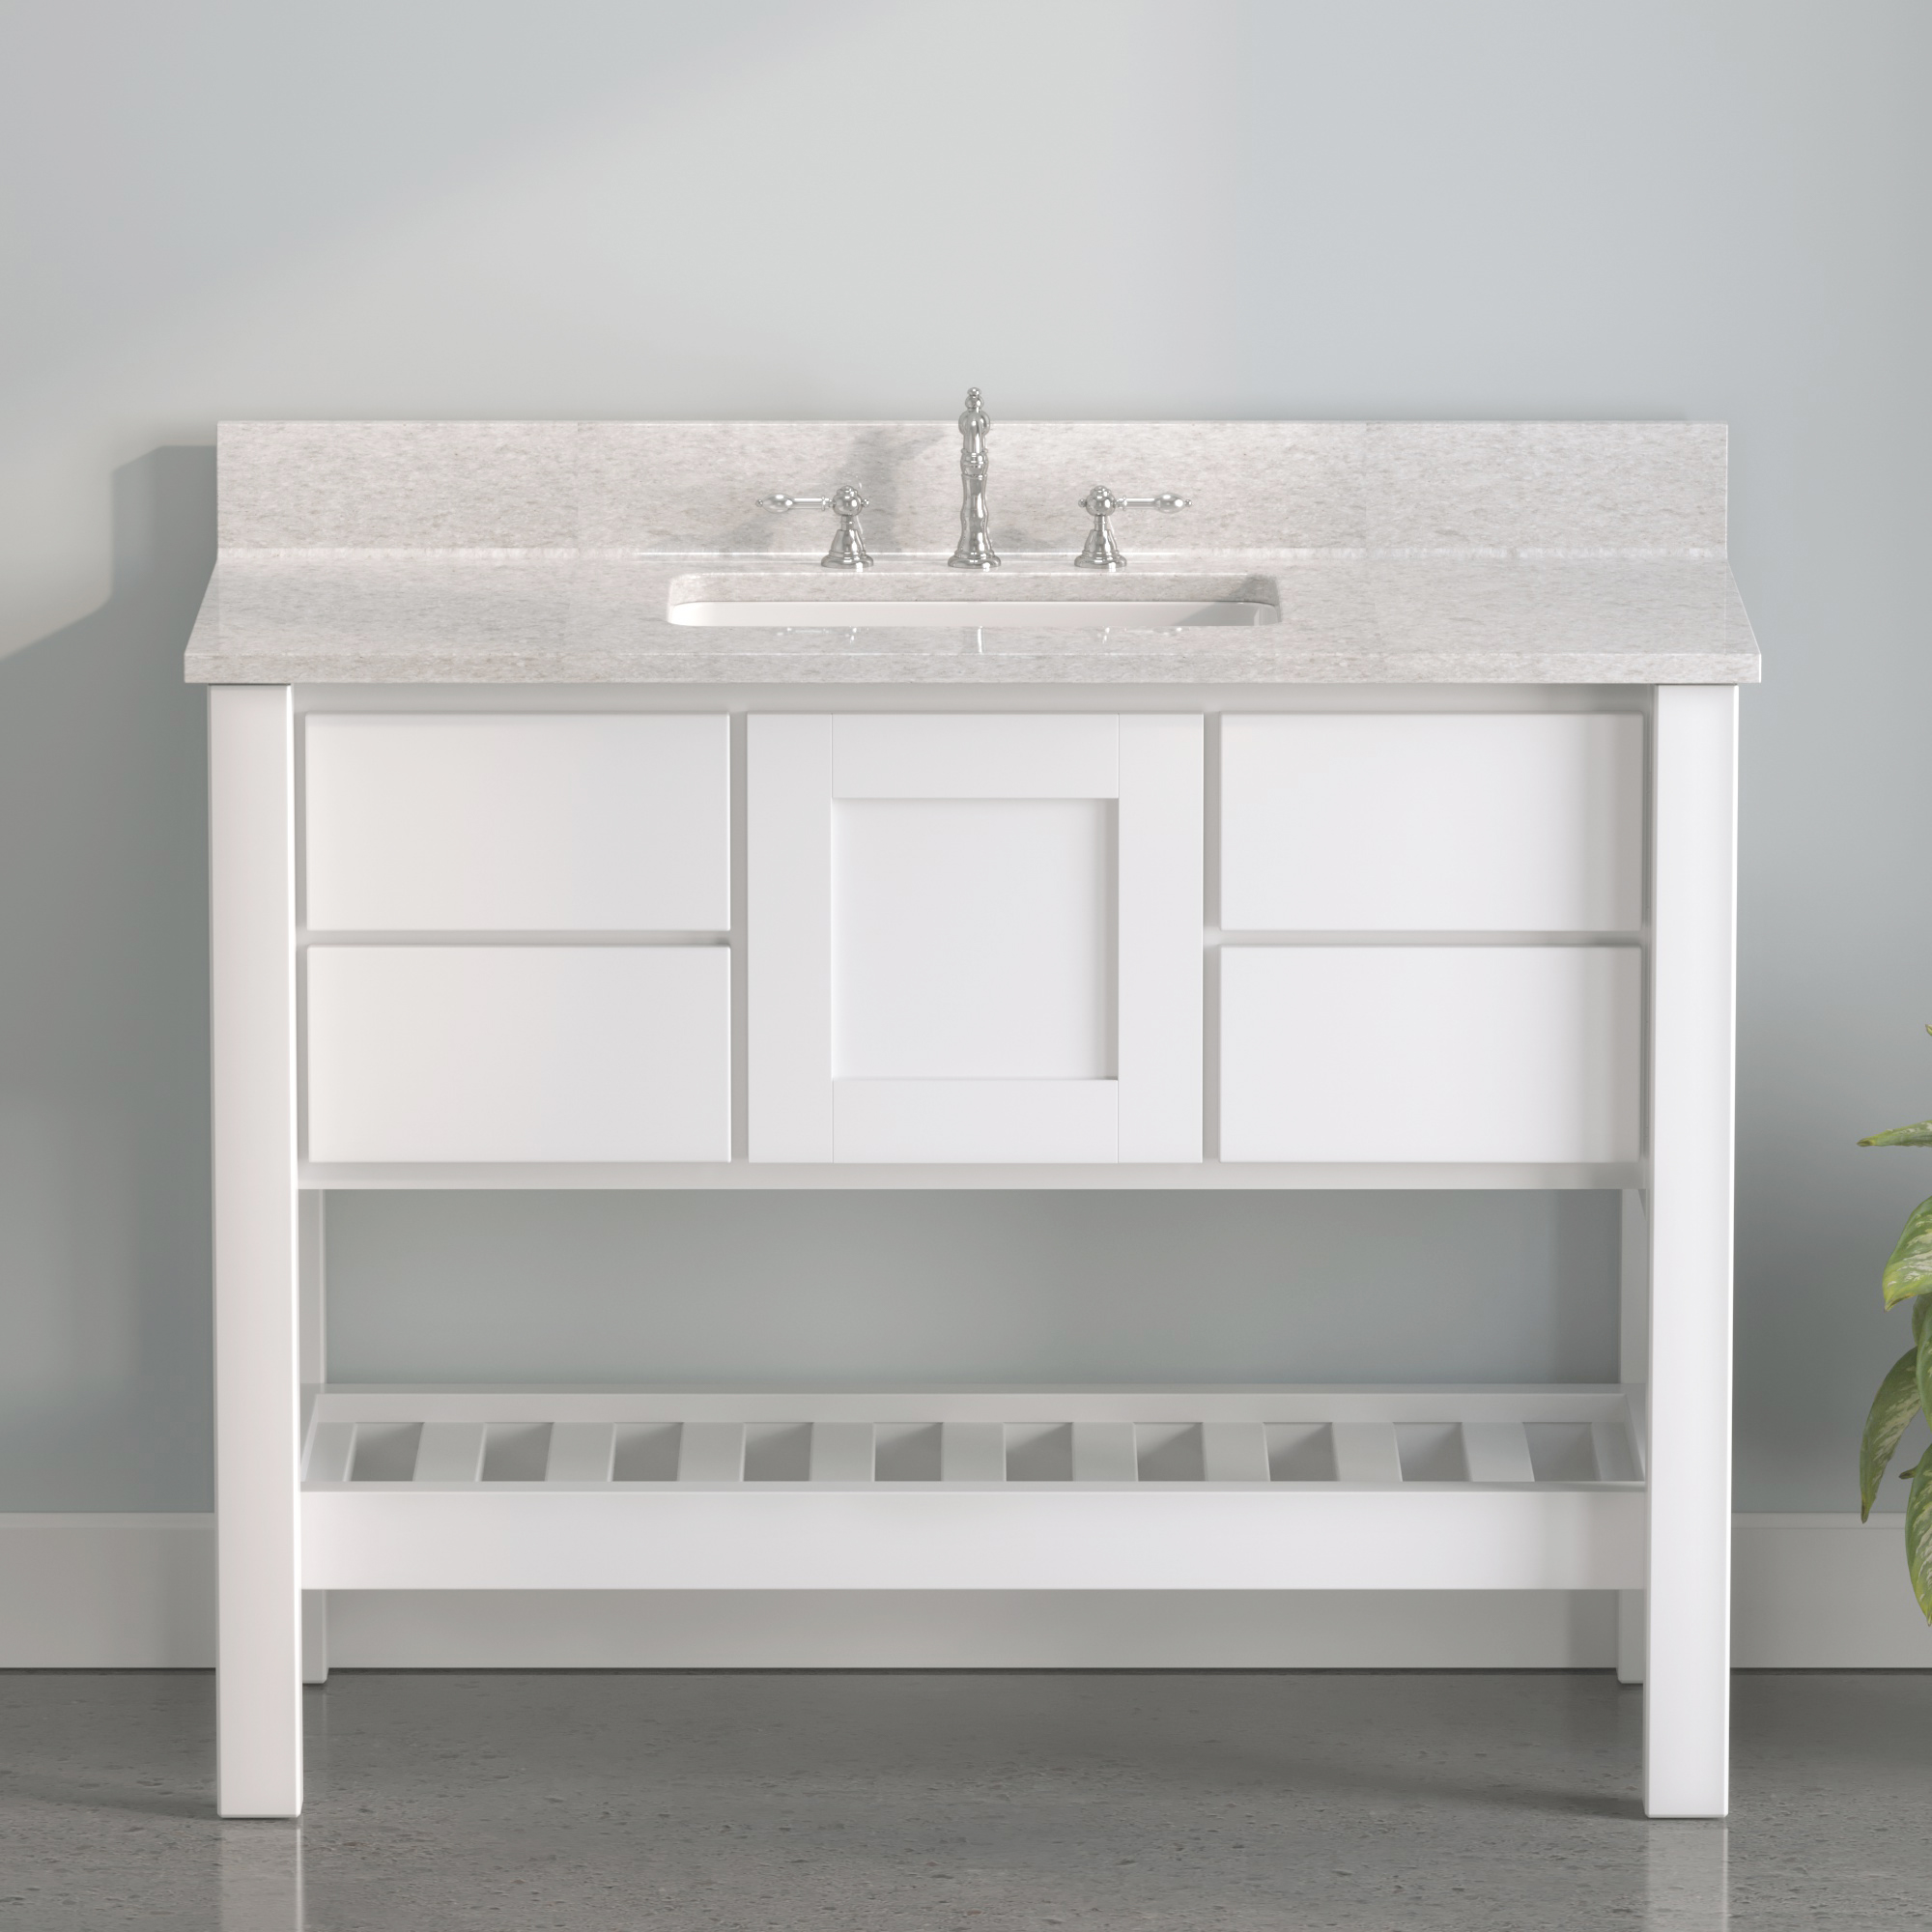 Made in USA, 48" White Solid Wood and Basin Sink Vanity with Countertop Options